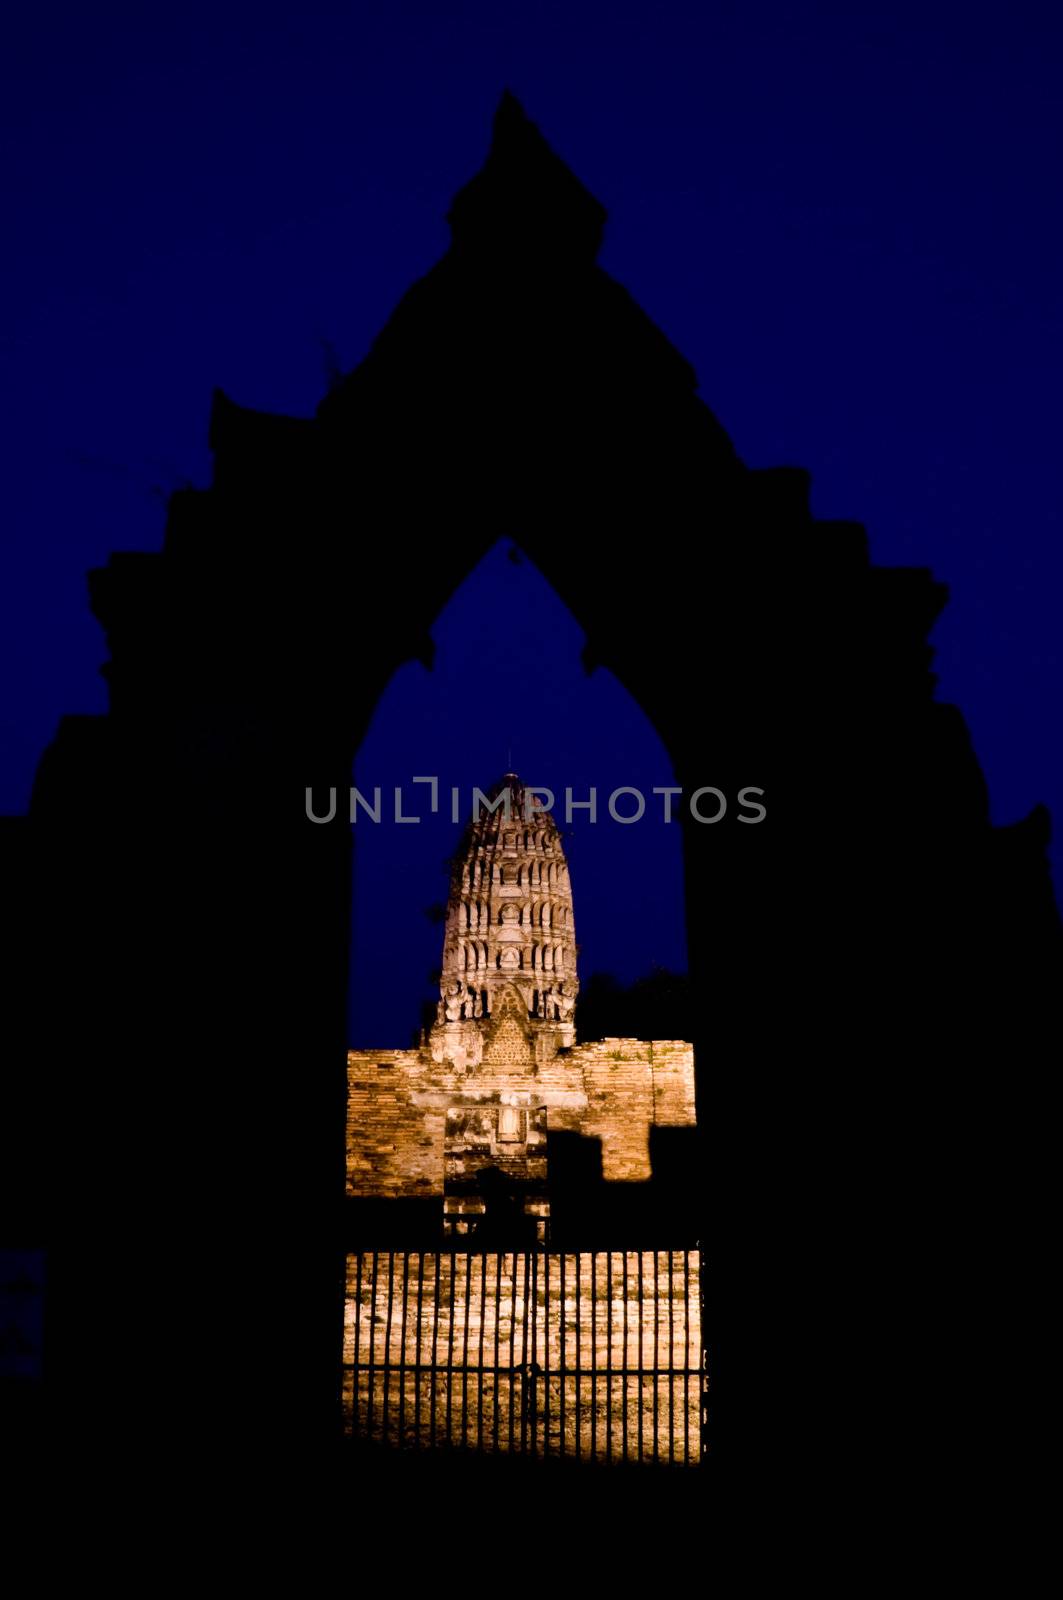 Iluminated Stupa under a dark blue night sky view through a stone gate in Ayutthaya. Ayutthaya city is the capital of Ayutthaya province in Thailand. Its historical park is a UNESCO world heritage.